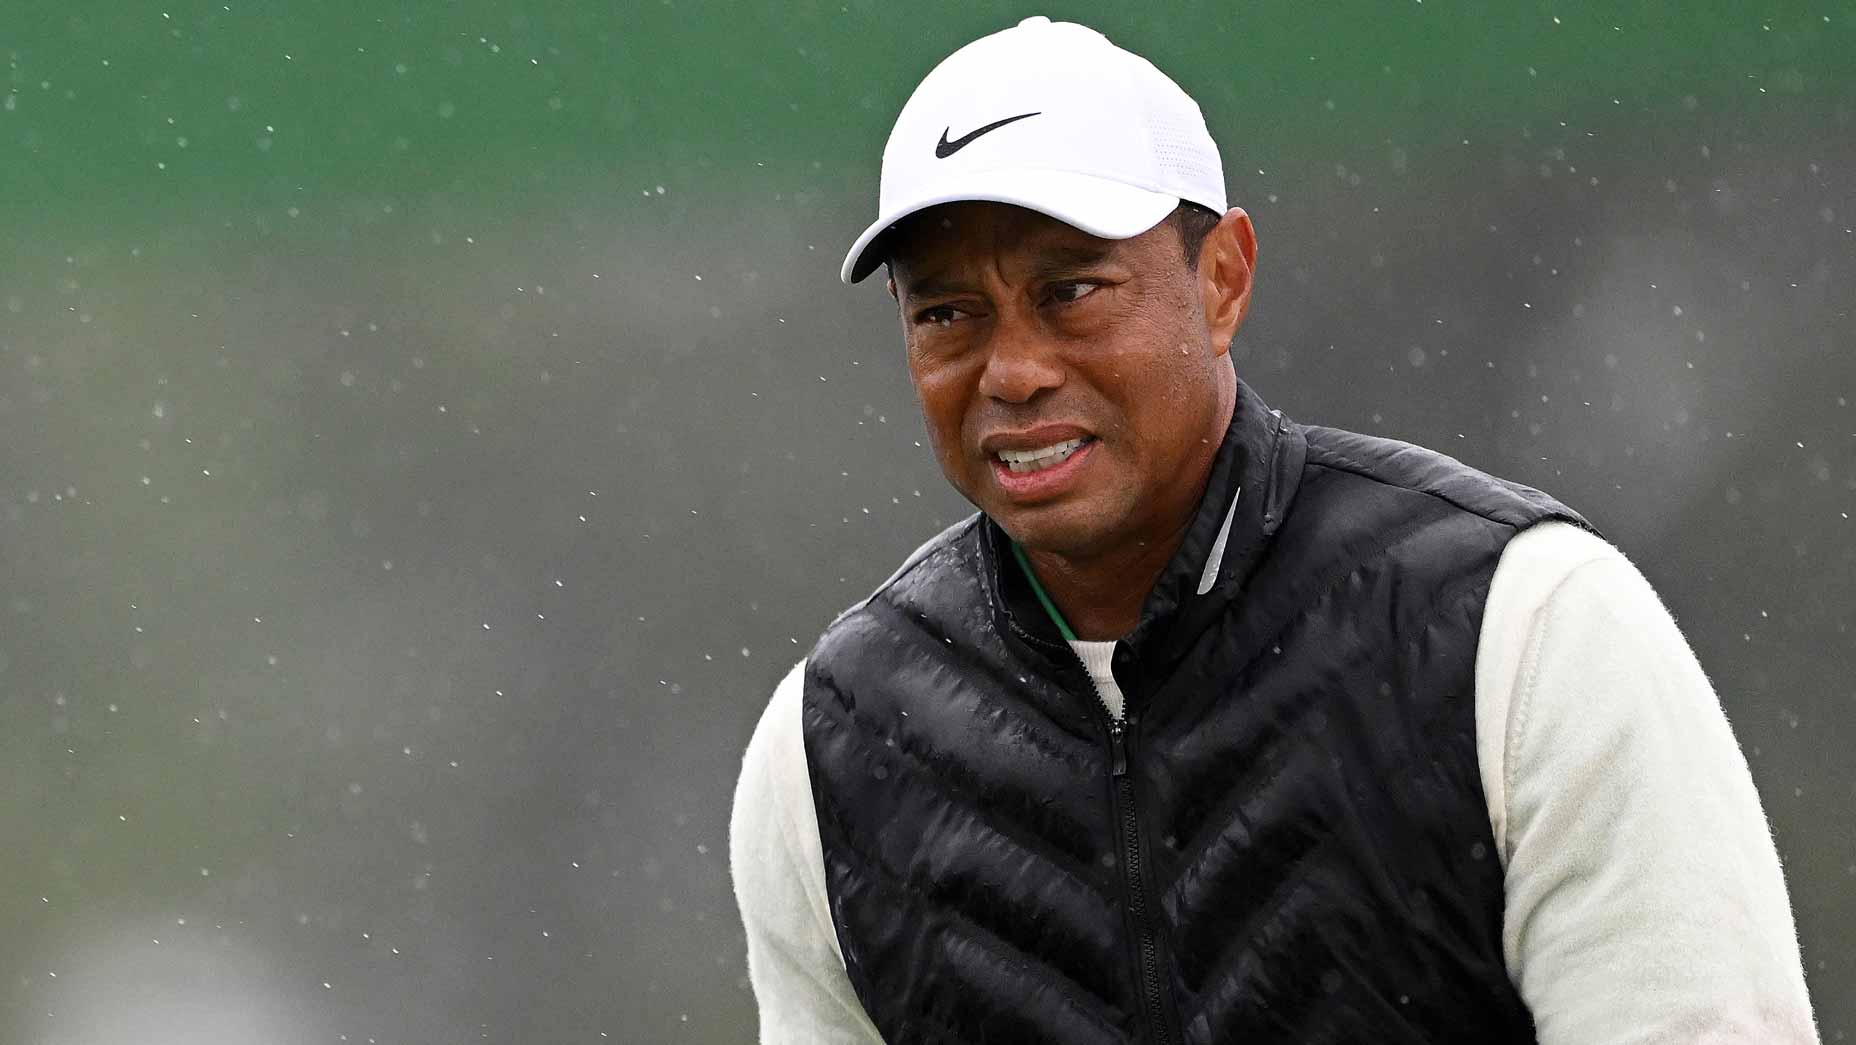 Tiger Woods withdraws from Masters due to injury